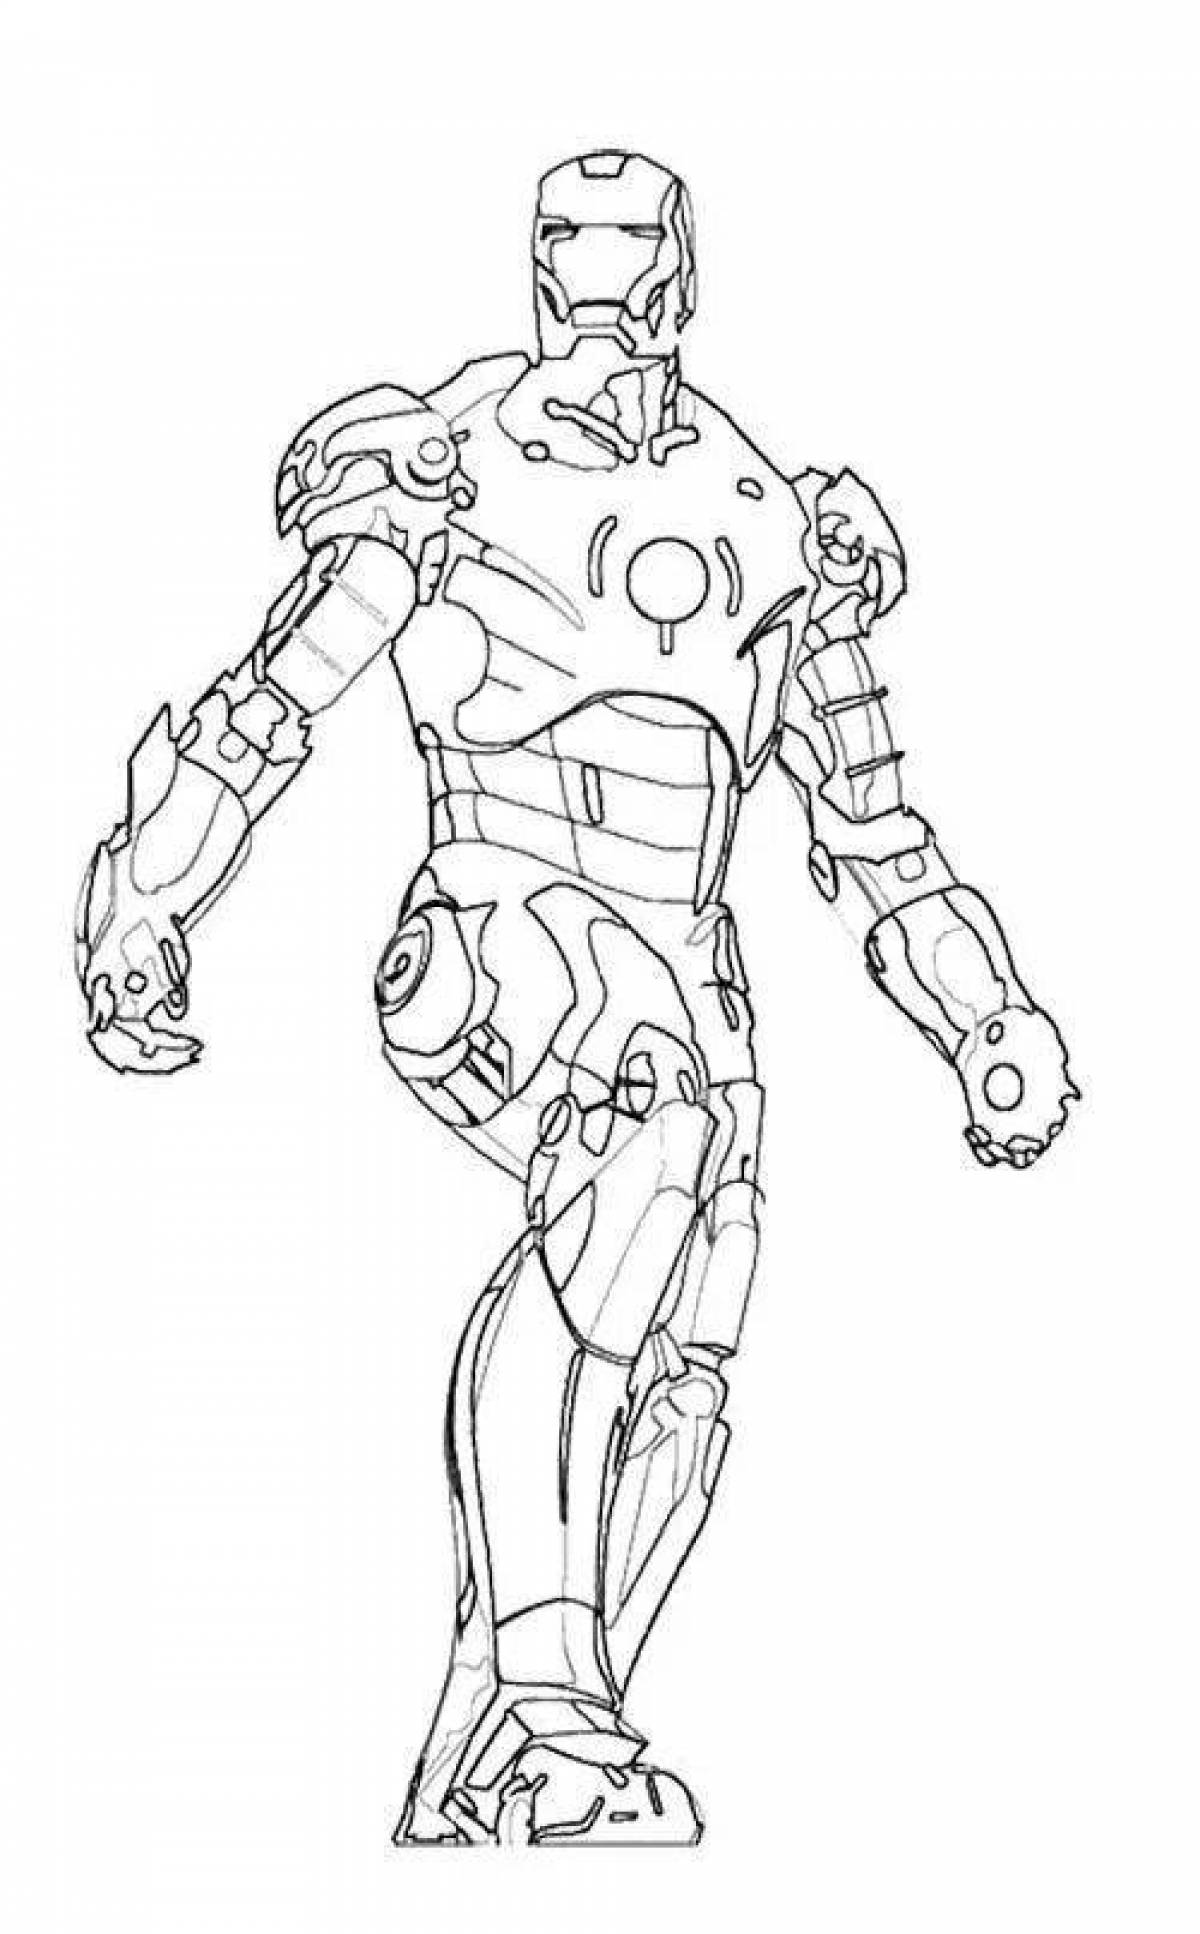 Marvelous iron patriot coloring page